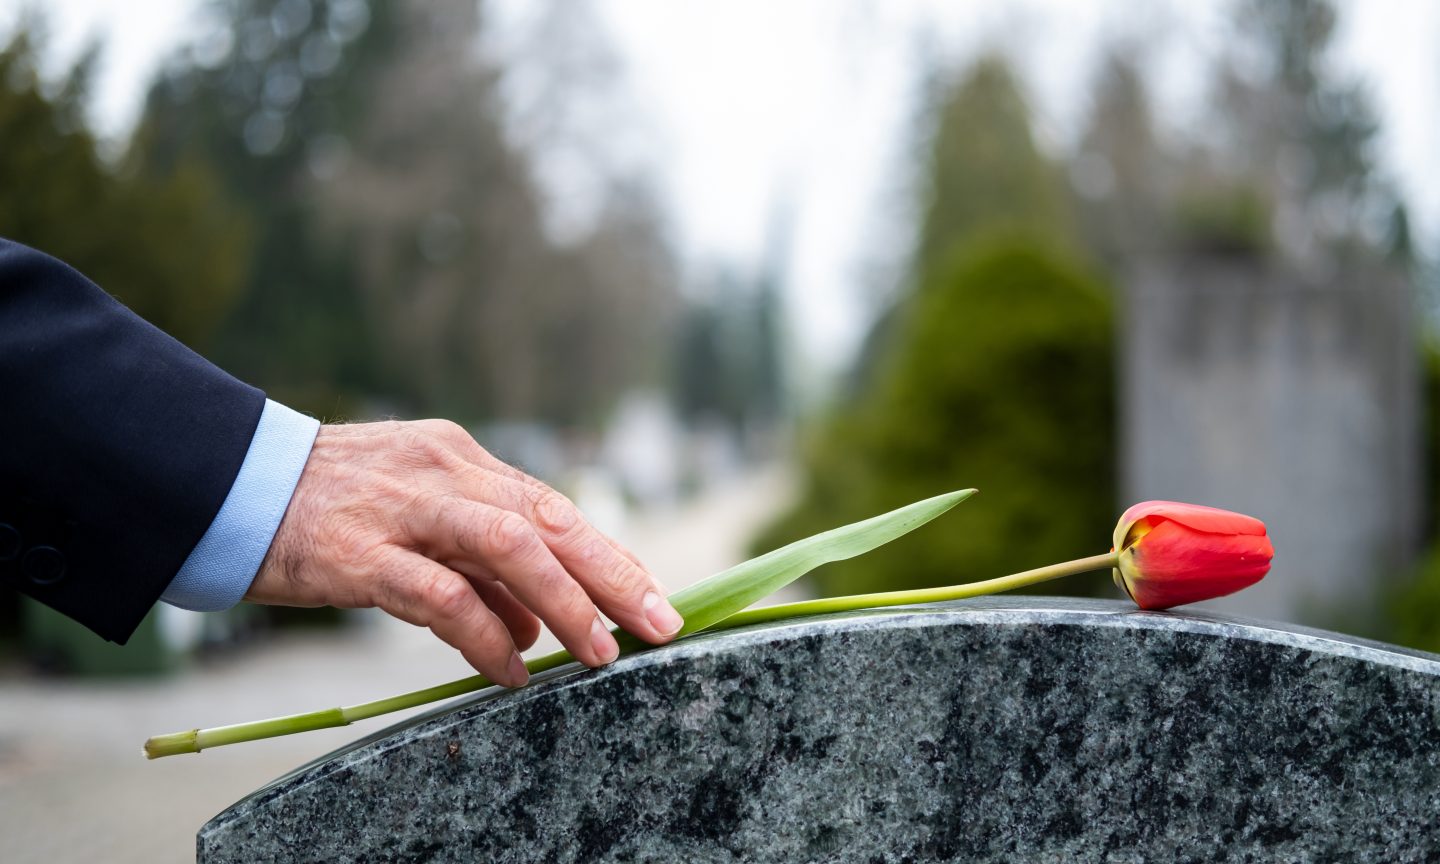 Dealing With Dying? There’s an App for That – NerdWallet